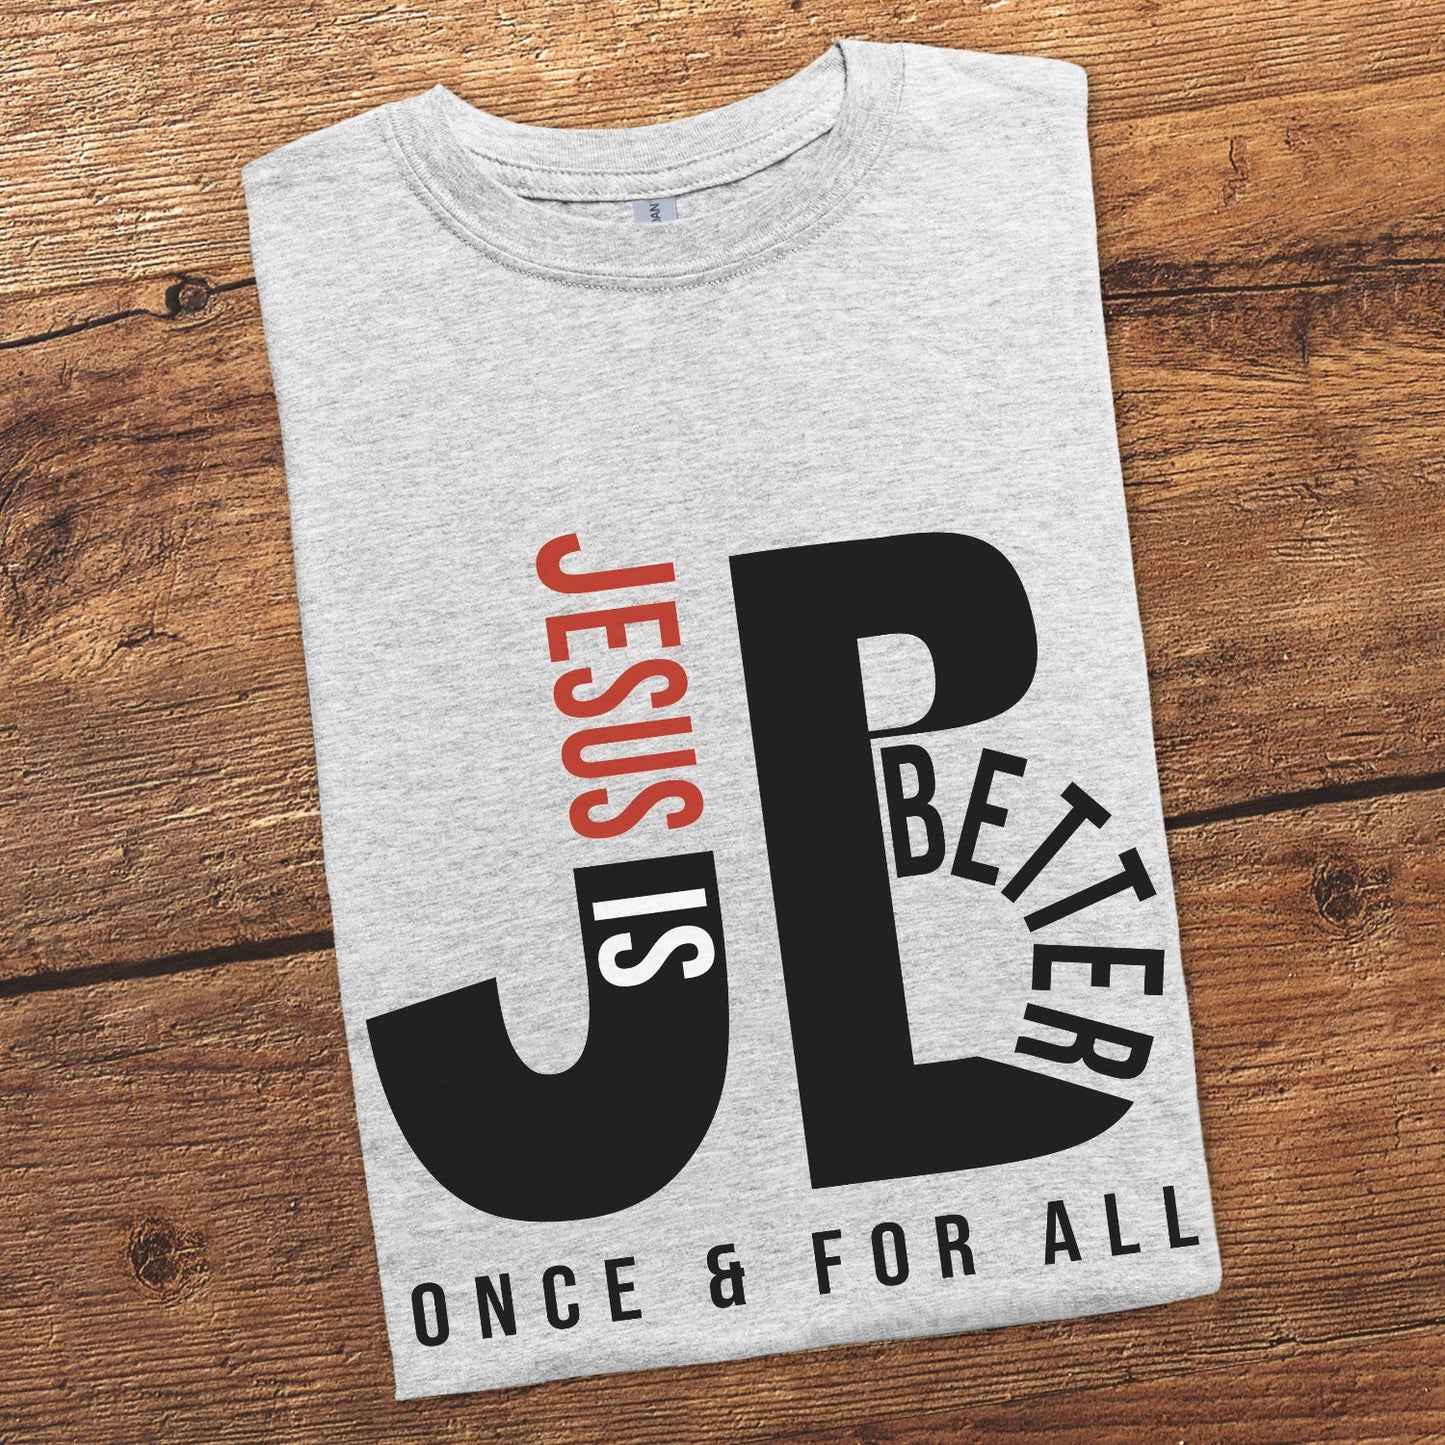 "JB" typography "Jesus is Better Once and For All" design in black and red letters, based on the Christian bible book of Hebrews, printed on a heather sport gray color Unisex t-shirt, created for faith-based men and women